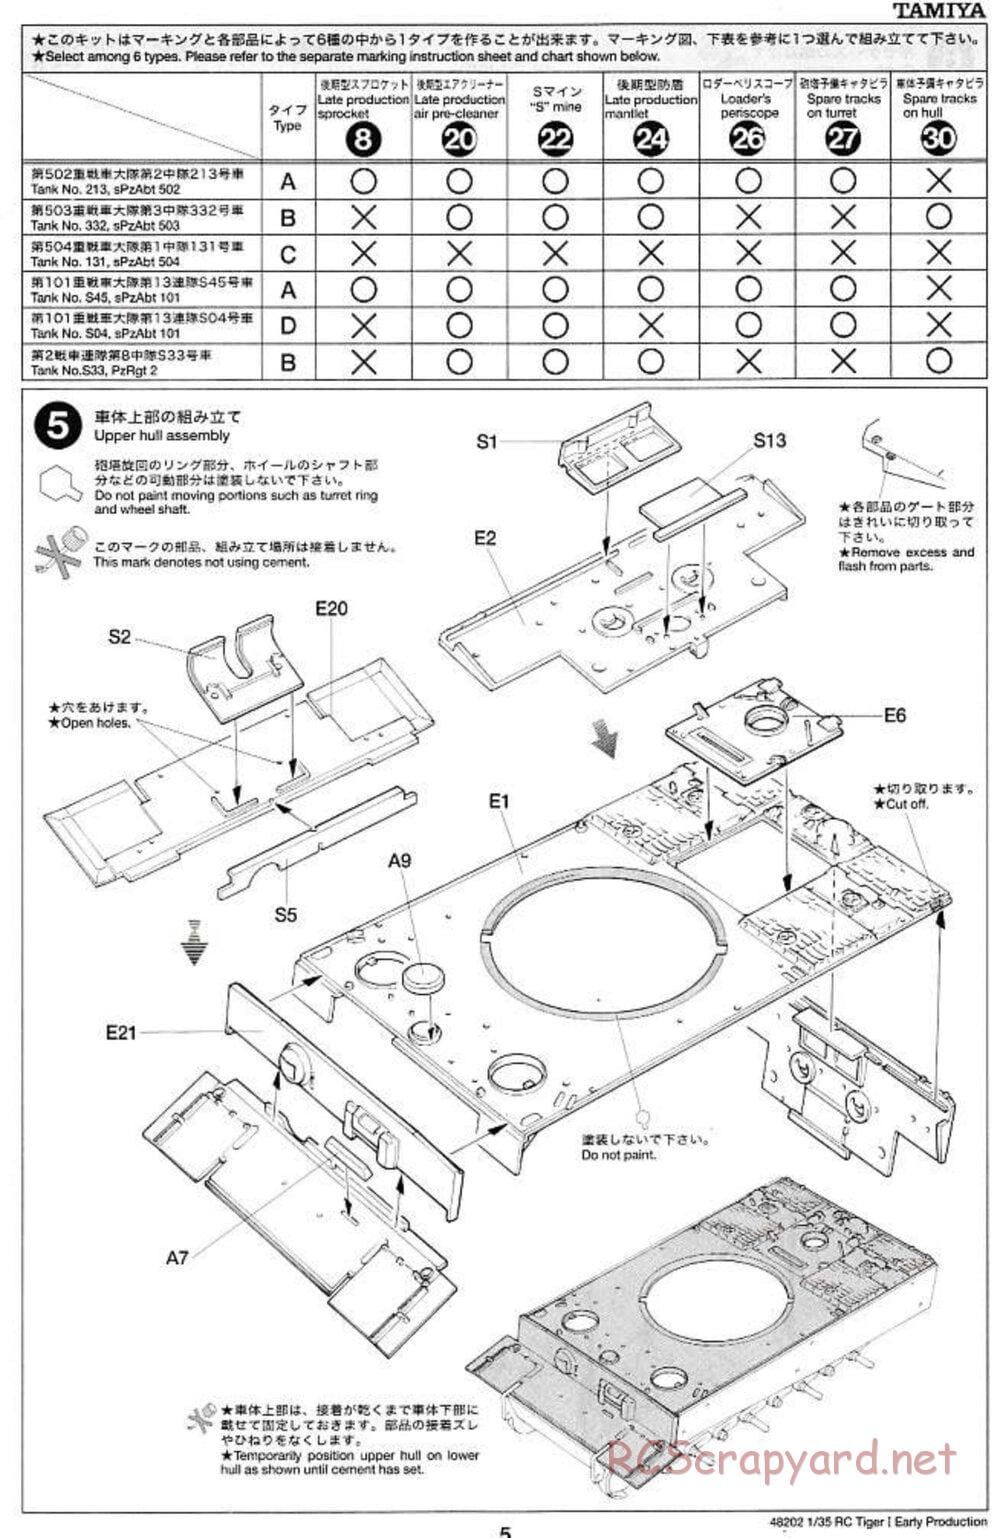 Tamiya - German Tiger 1 Early Production - 1/35 Scale Chassis - Manual - Page 5